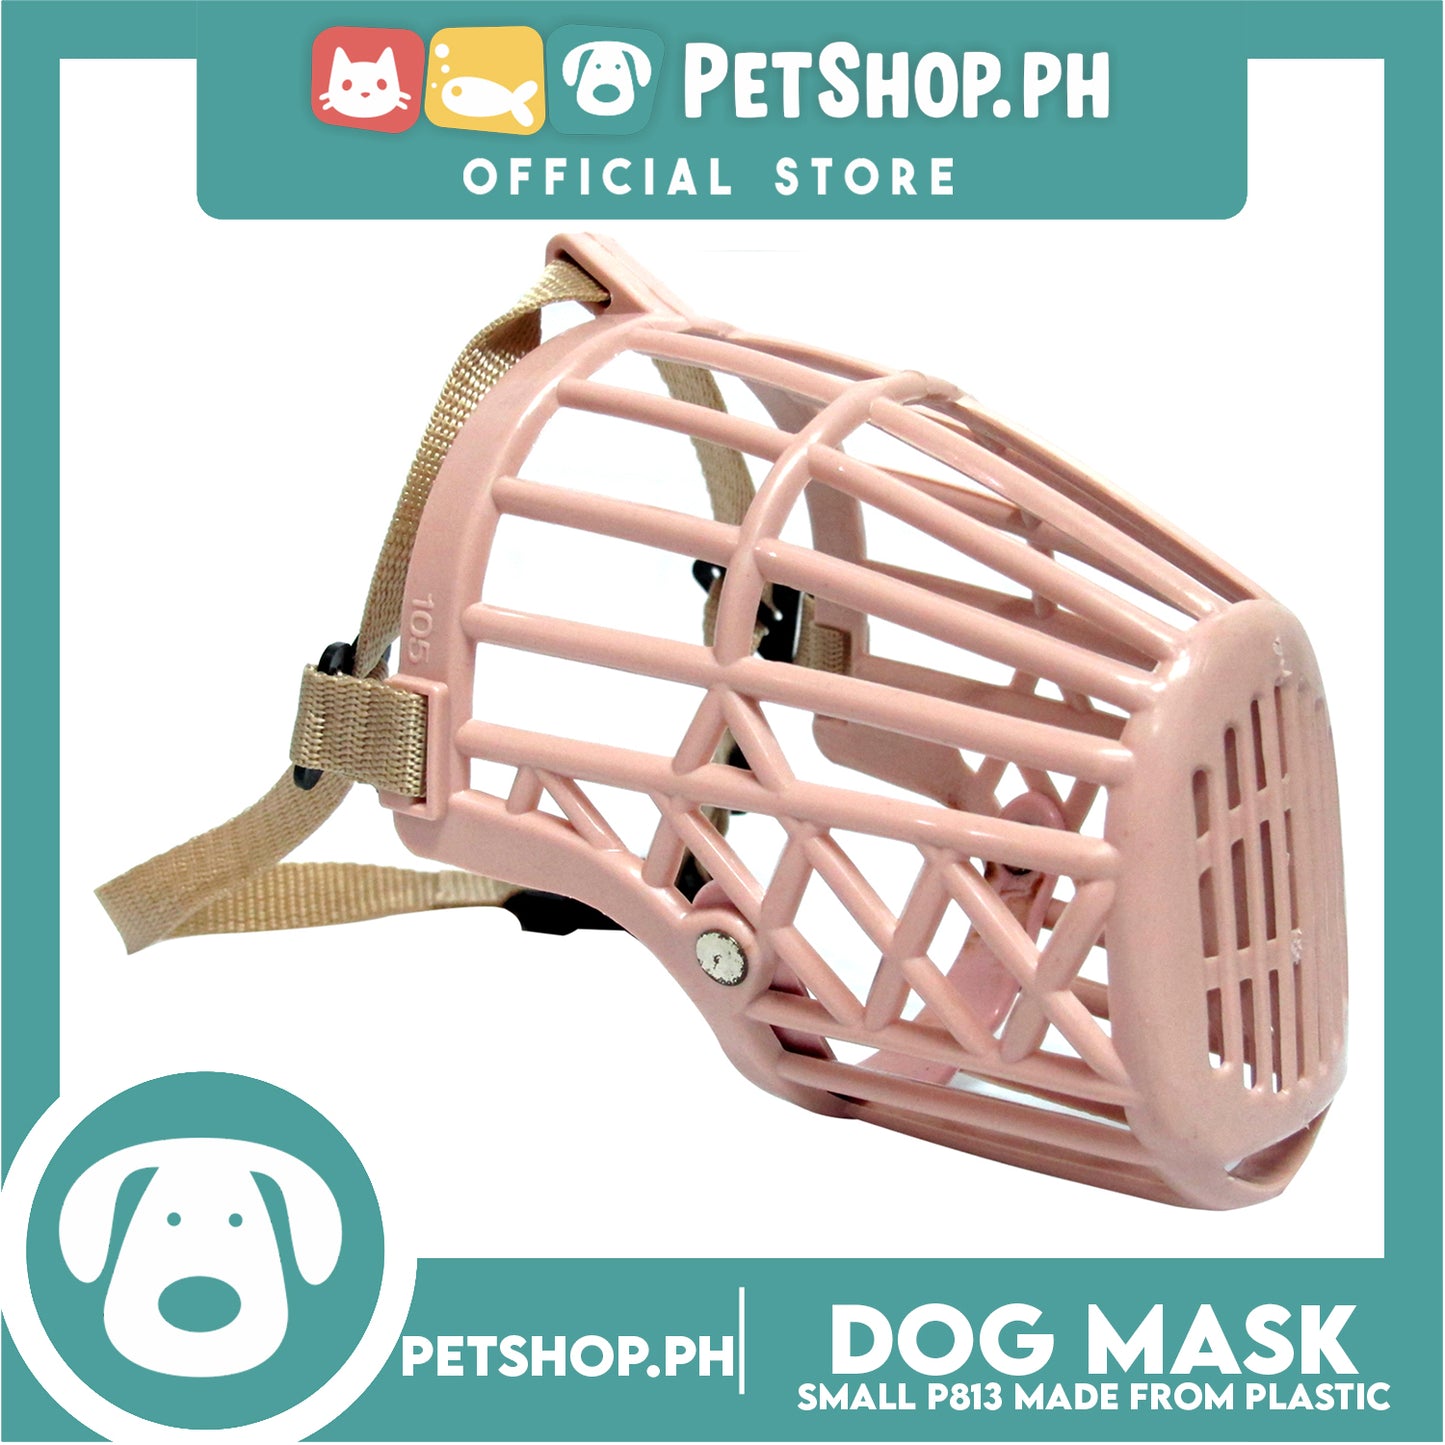 Dog Muzzle Soft Silicone Muzzle Adjustable Mask #3 P813-1 (Medium) for Small Dogs, Puppies